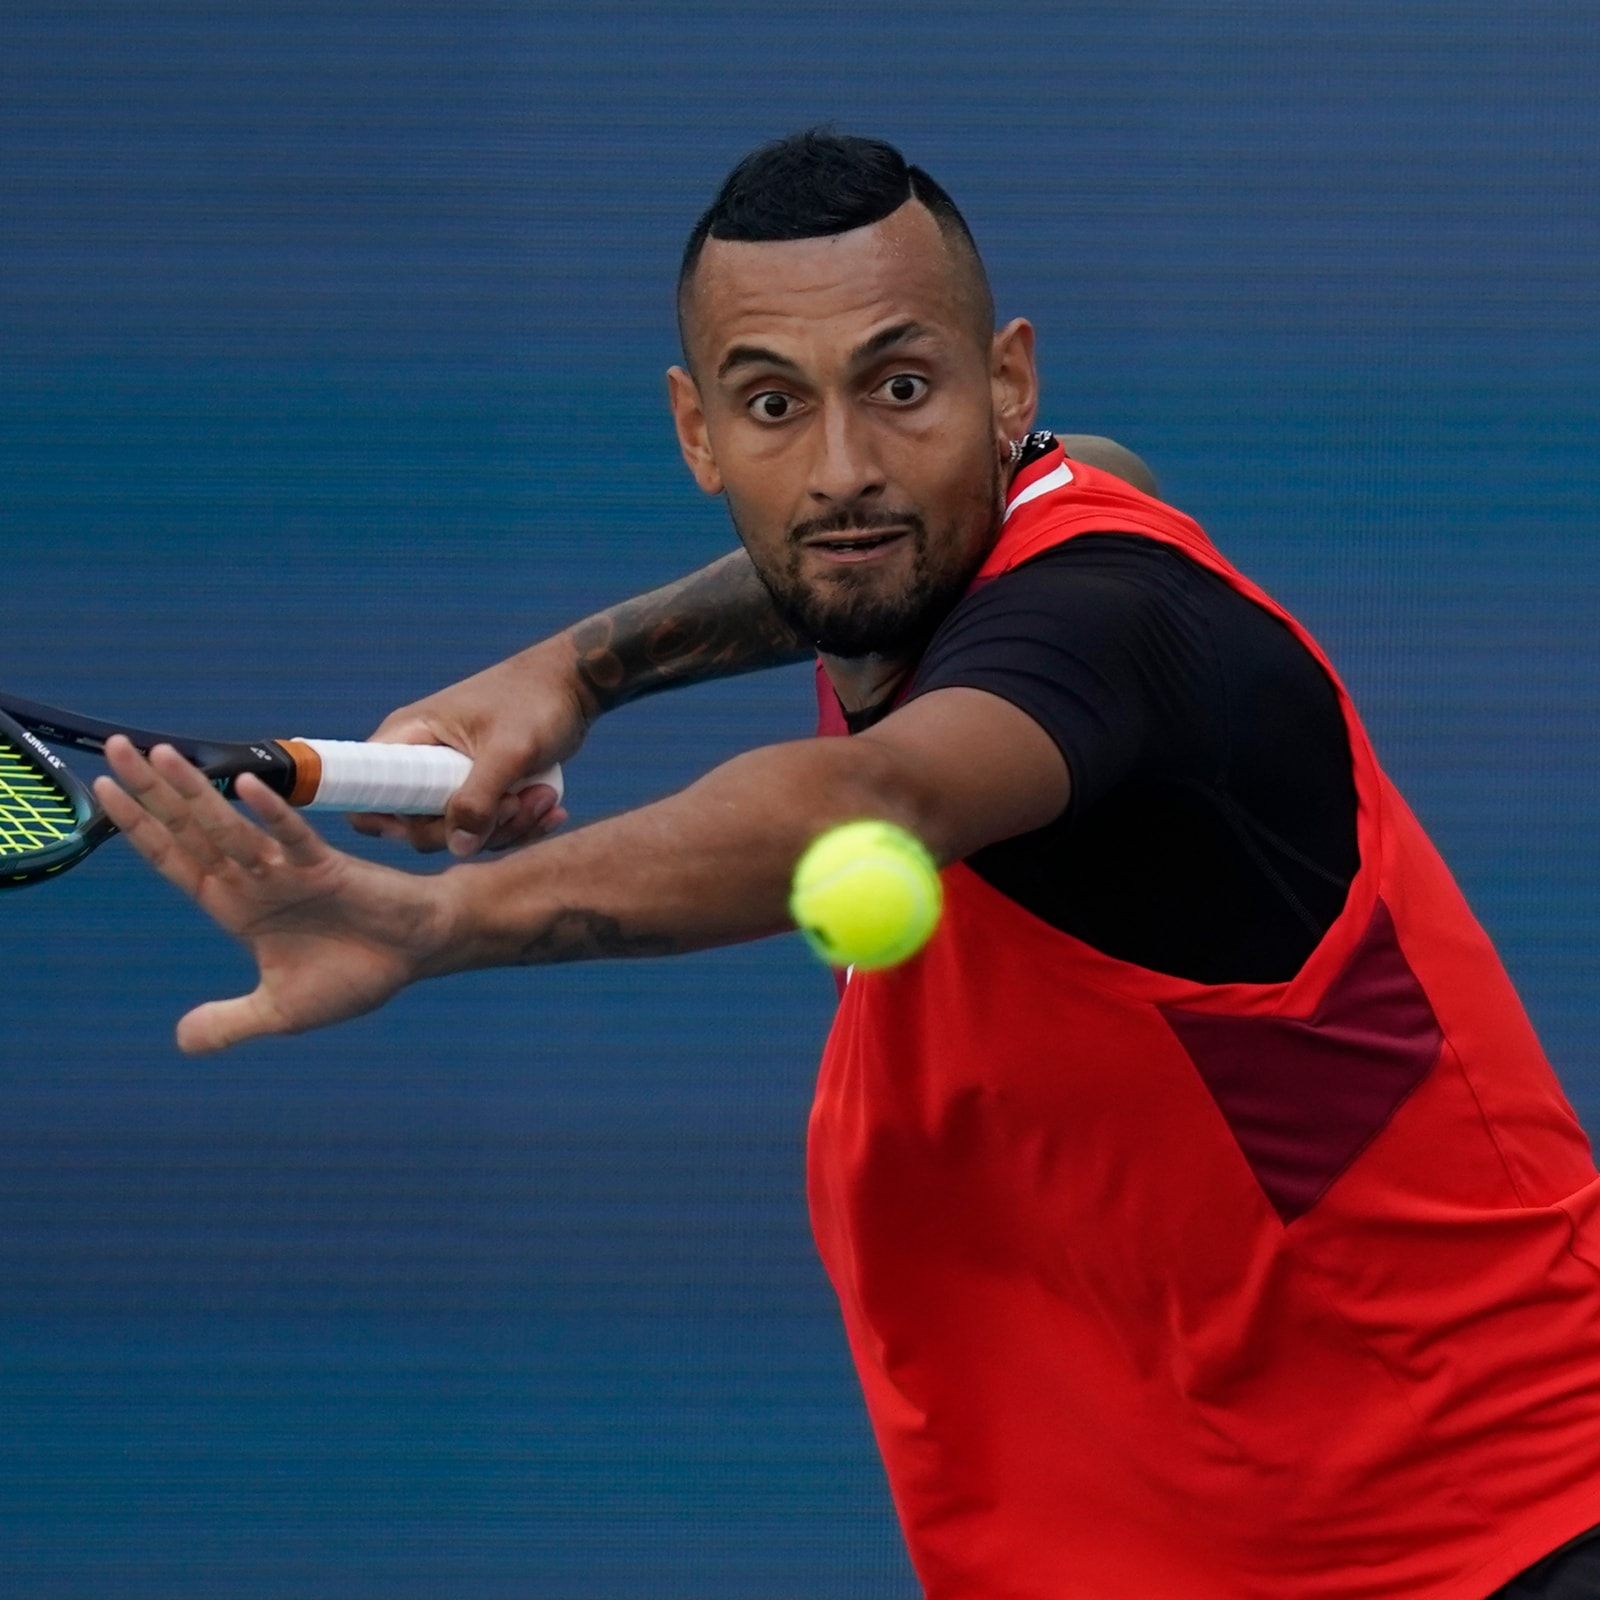 Beauty of Sport Gone With Introduction of Off-court Coaching, Believes Nick  Kyrgios